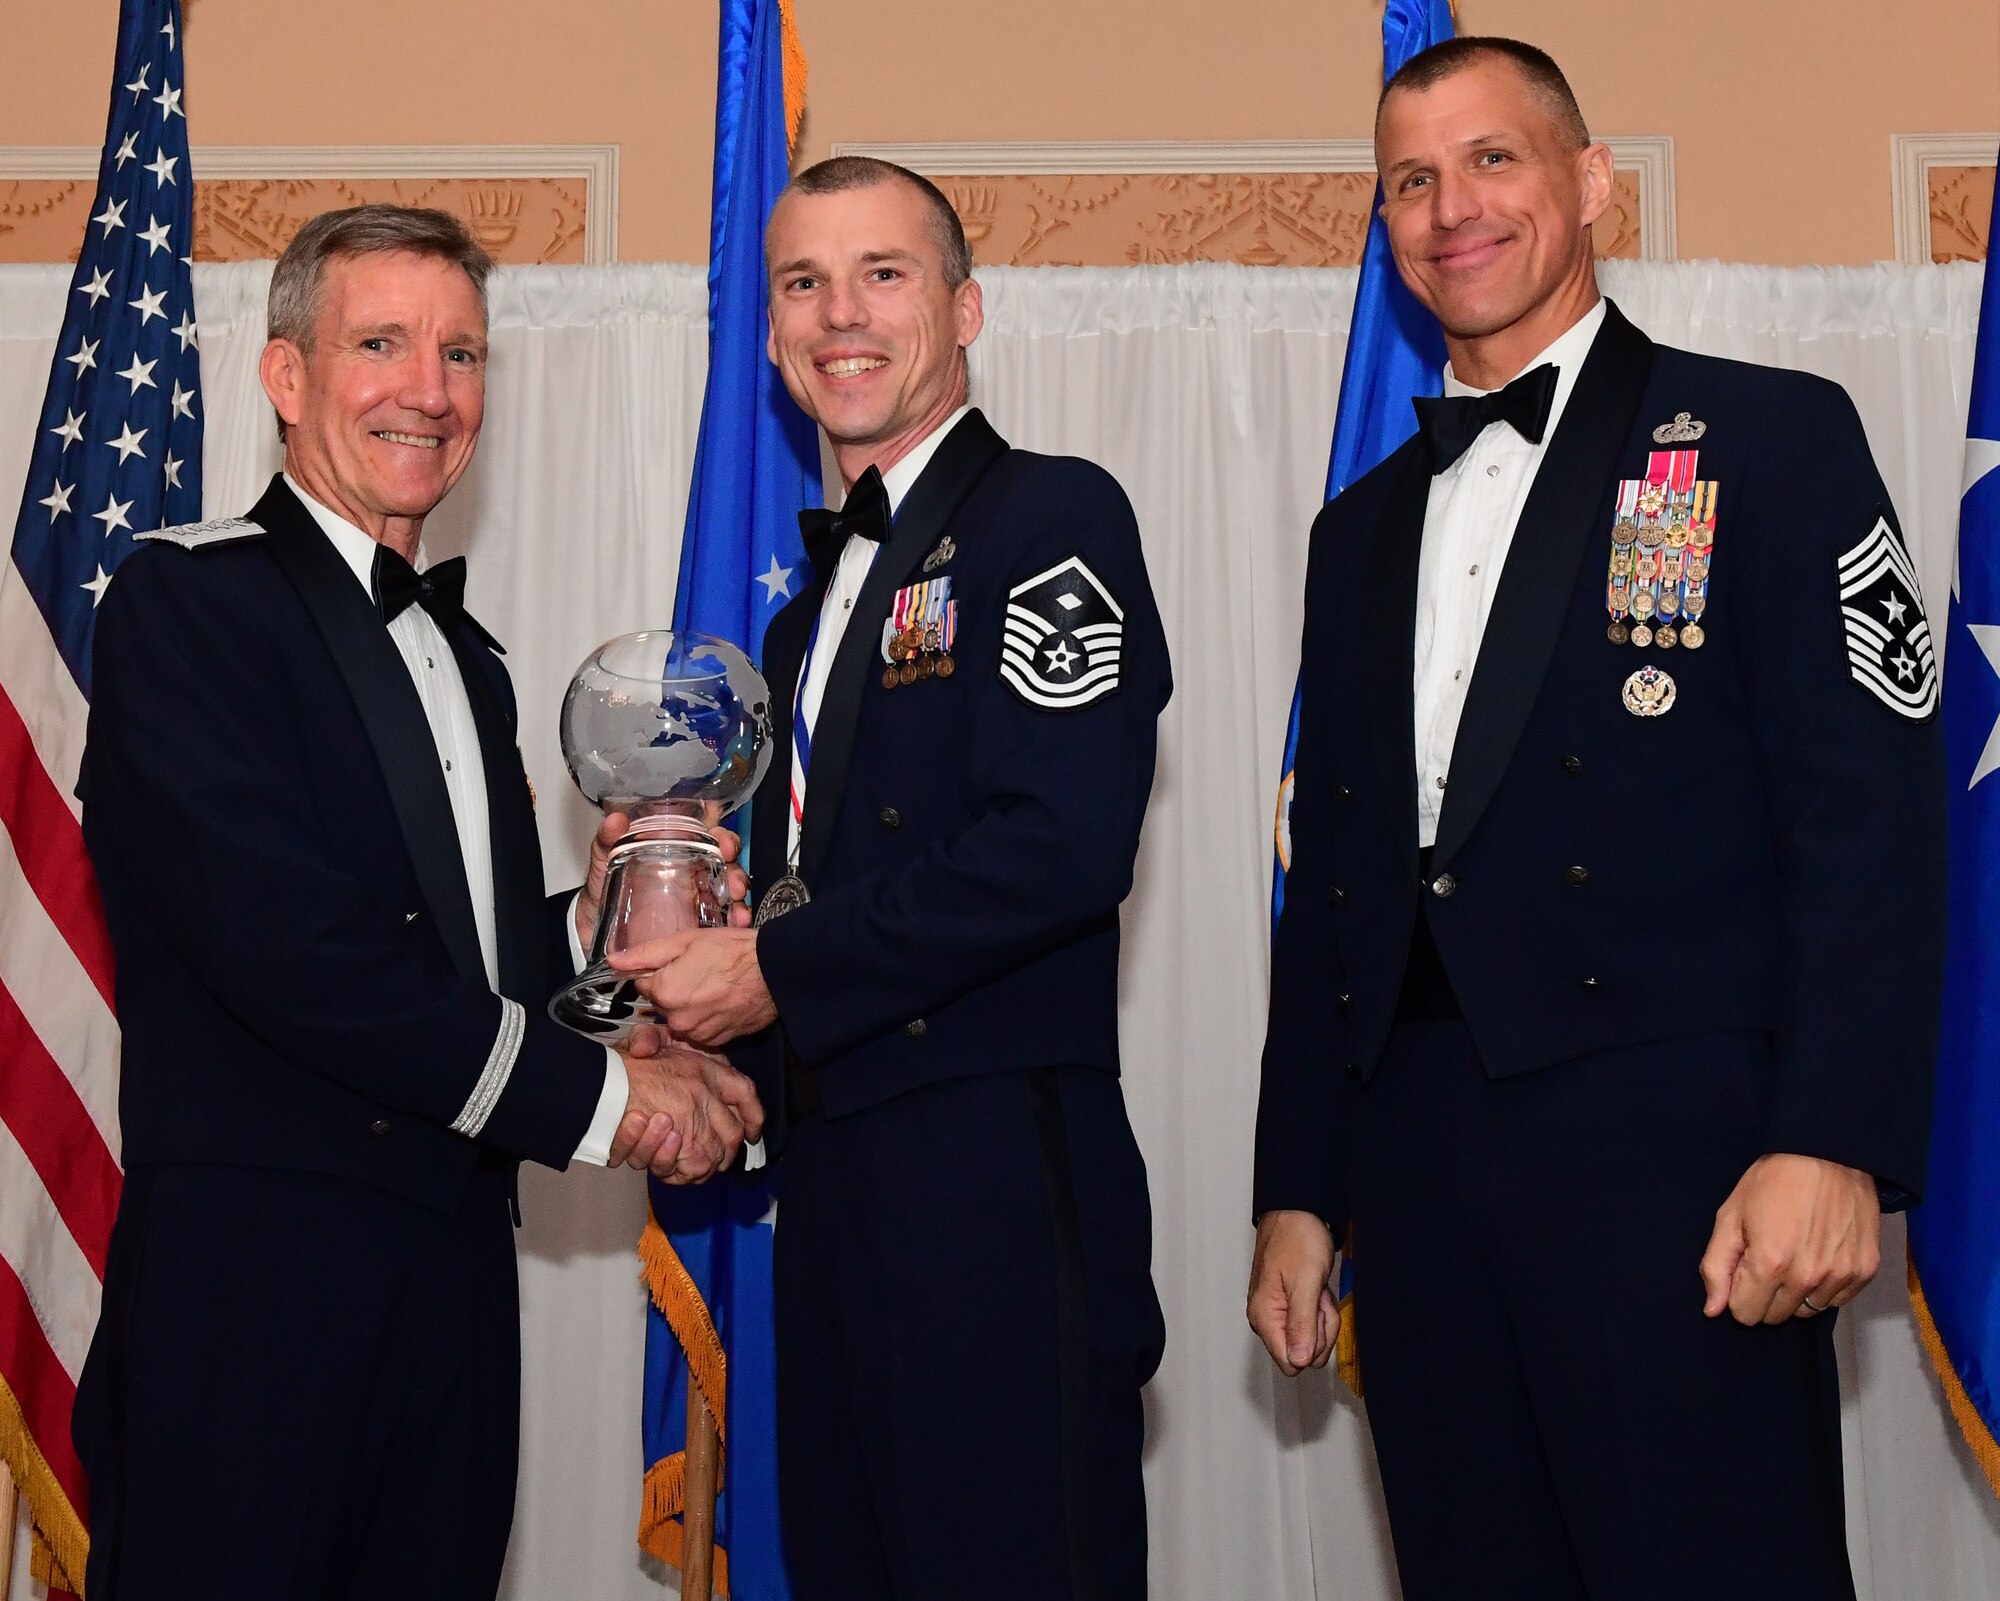 Gen. Hawk Carlisle, left, commander, Air Combat command presents an award to Master Sgt. Mark Curtis, 379th Expeditionary Aircraft Maintenance Squadron first sergeant, as Chief Master Sgt. Steve McDonald, command chief, ACC observes during the 2017 Outstanding Airmen of the Year banquet at the Bayview Community Center in Langley AFB, Virginia, March 8, 2017. The 12 Outstanding Airmen earn the Outstanding Airman ribbon with the bronze service star device and wear the Outstanding Airman badge for one year. They also serve on the Air Force Enlisted Council for one year. (U.S. Air Force photo by Staff Sgt. Nick Wilson)